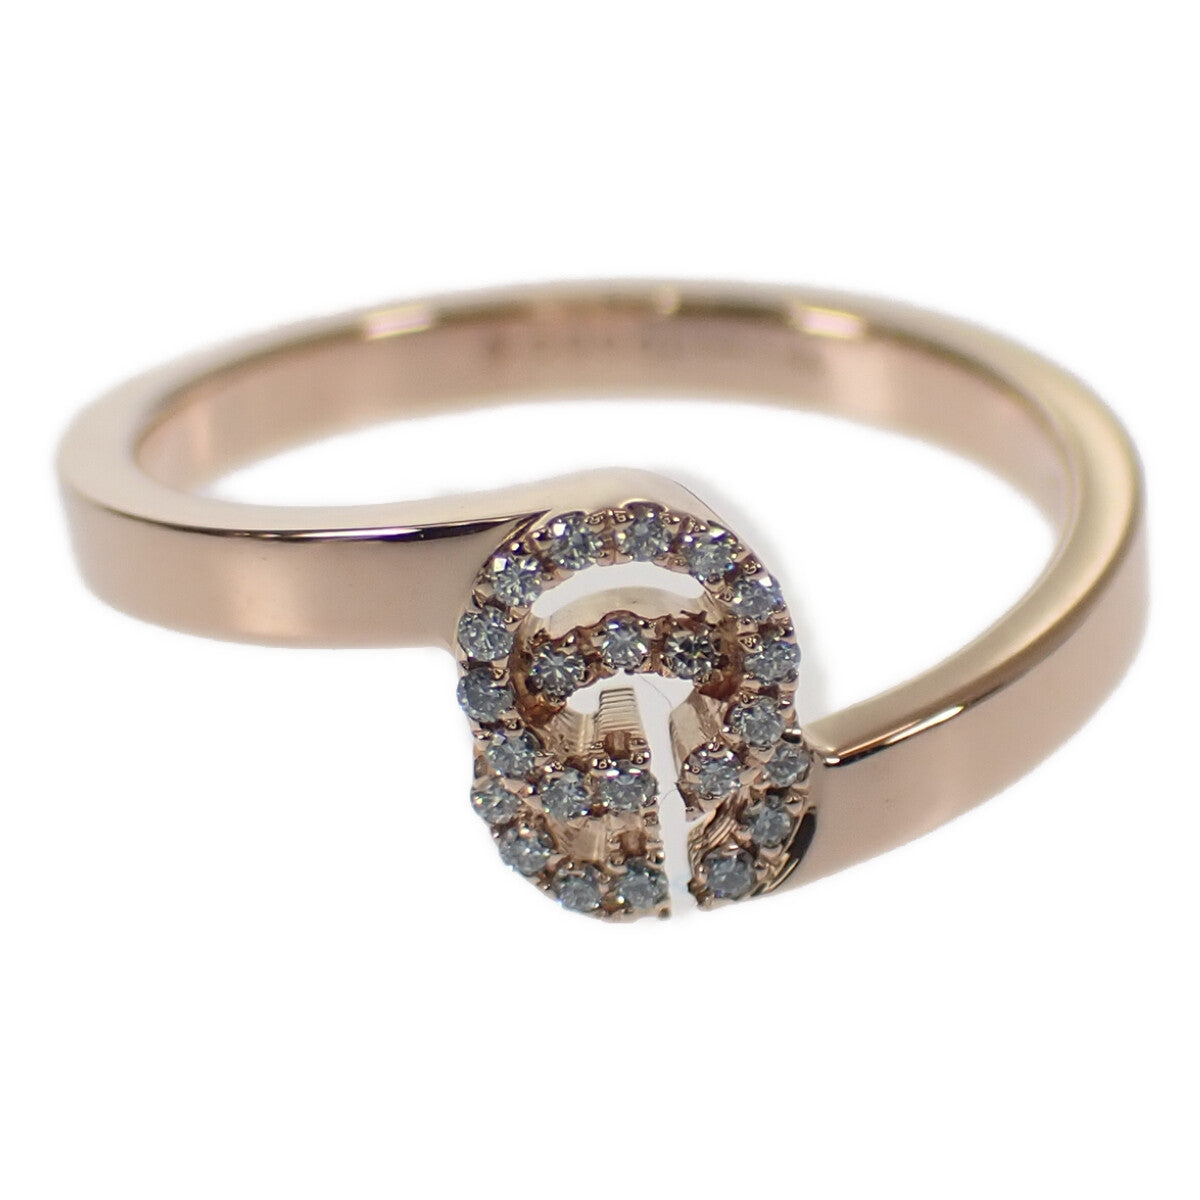 Gucci 18k GG Running Diamond Ring Metal Ring 457127 J8540 5702 in Excellent condition